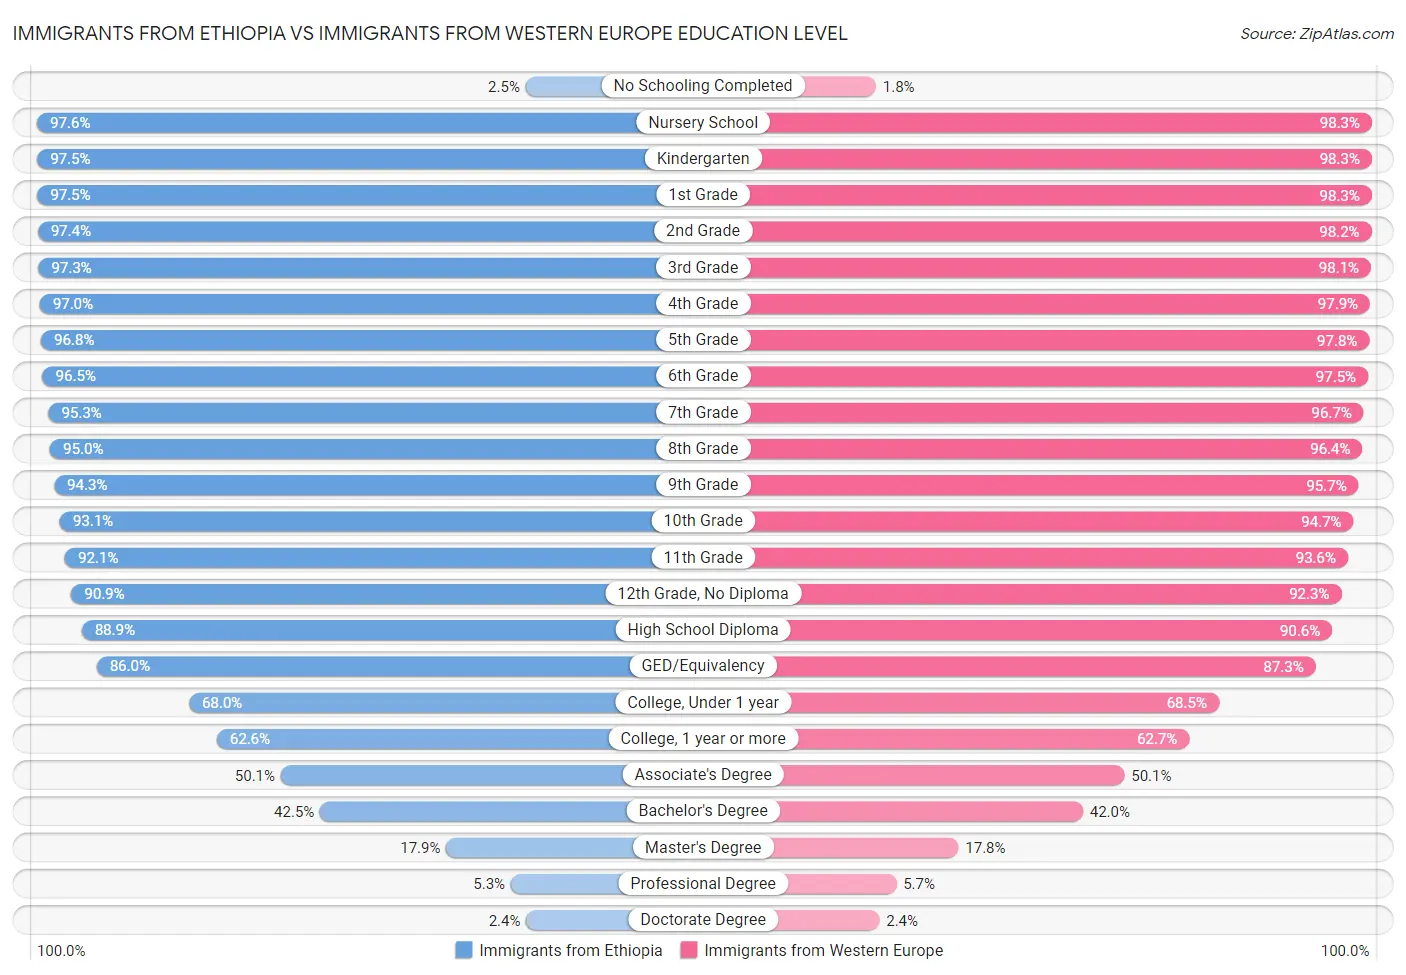 Immigrants from Ethiopia vs Immigrants from Western Europe Education Level